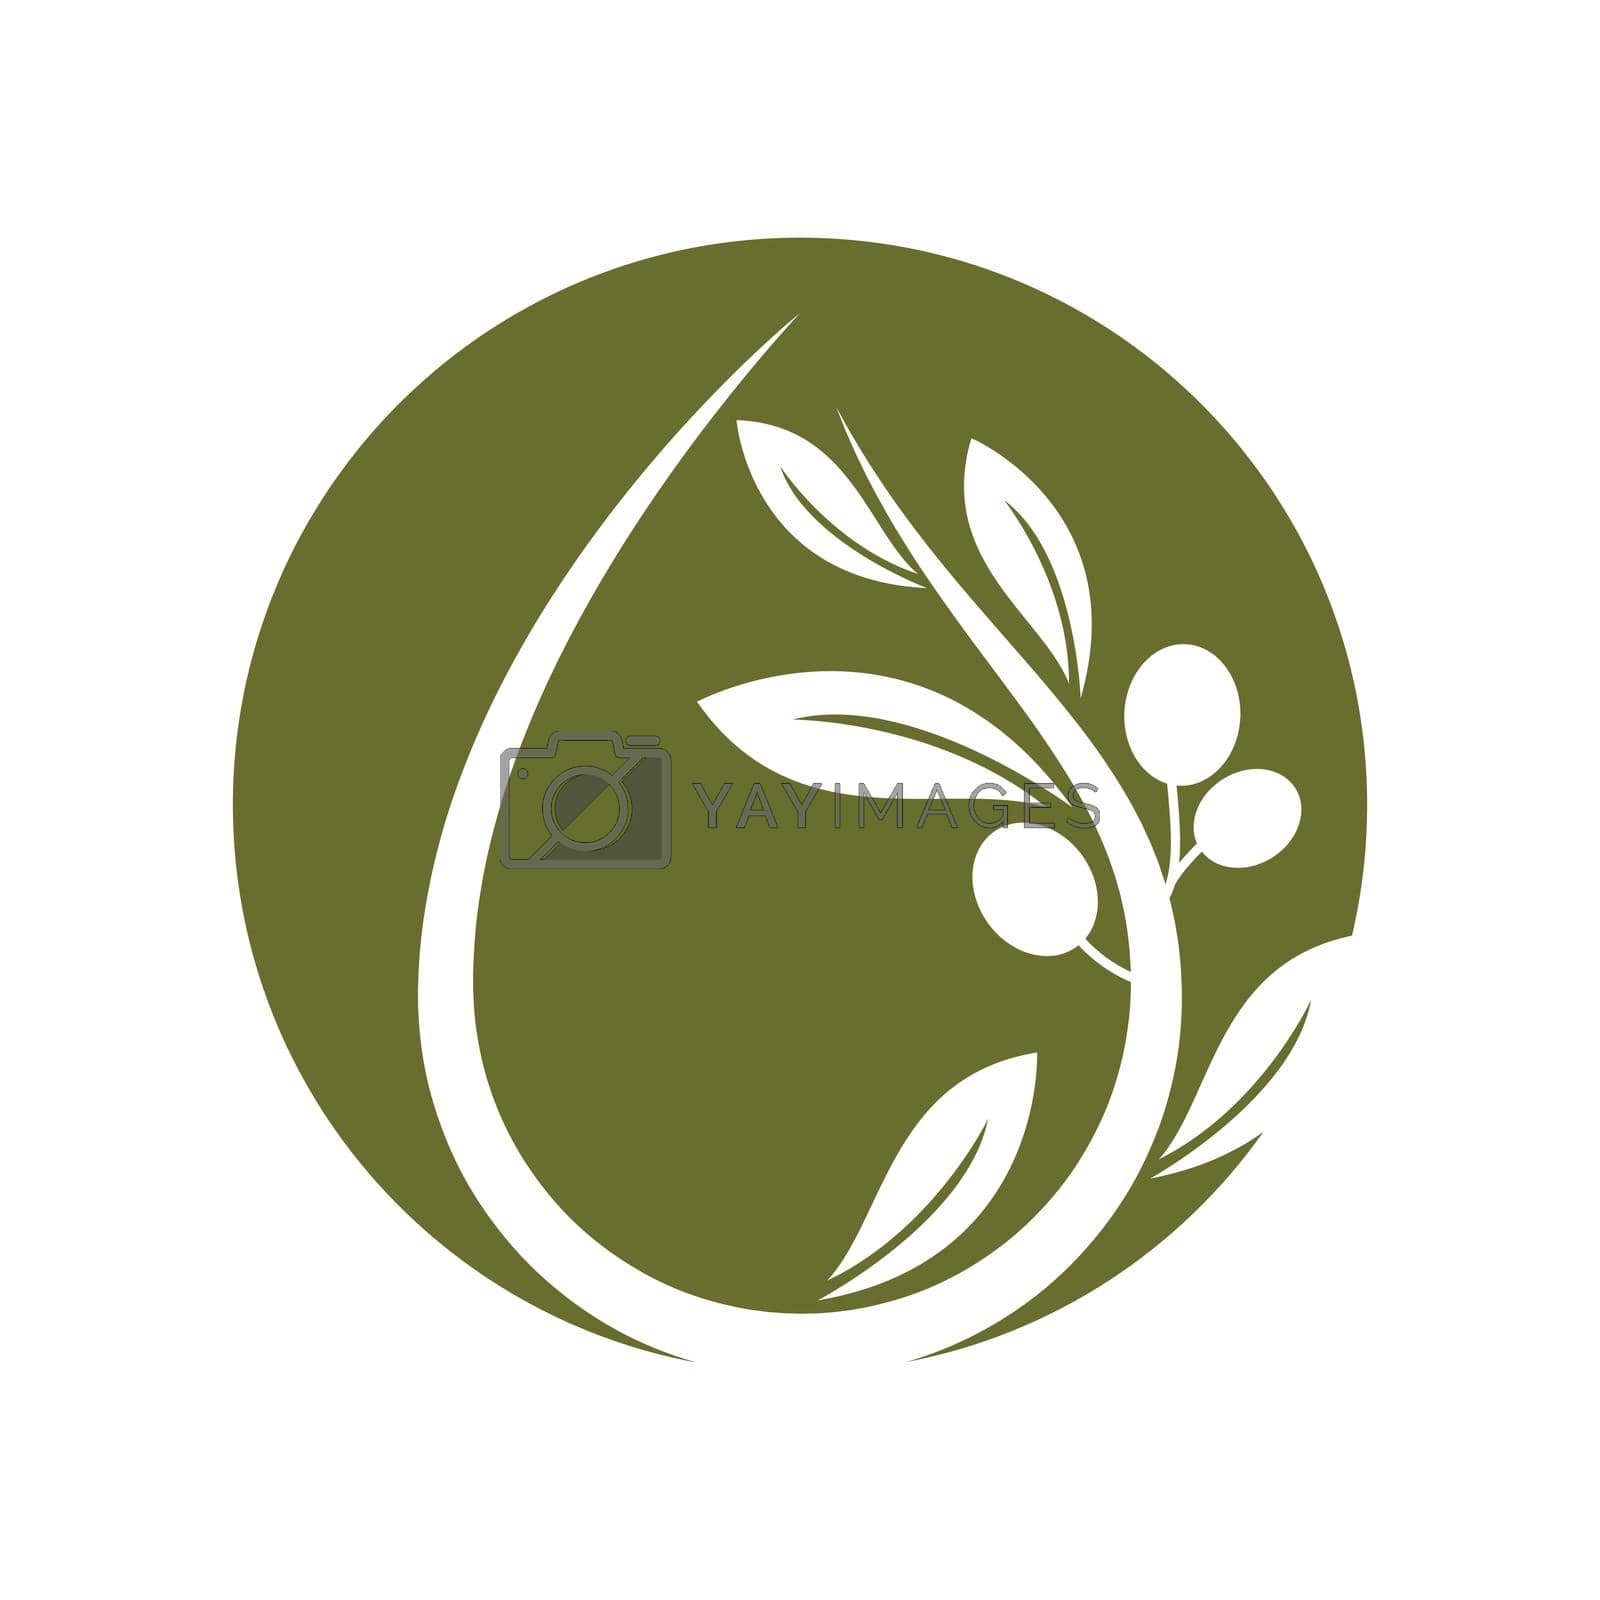 Royalty free image of Olive illustration vector by awk